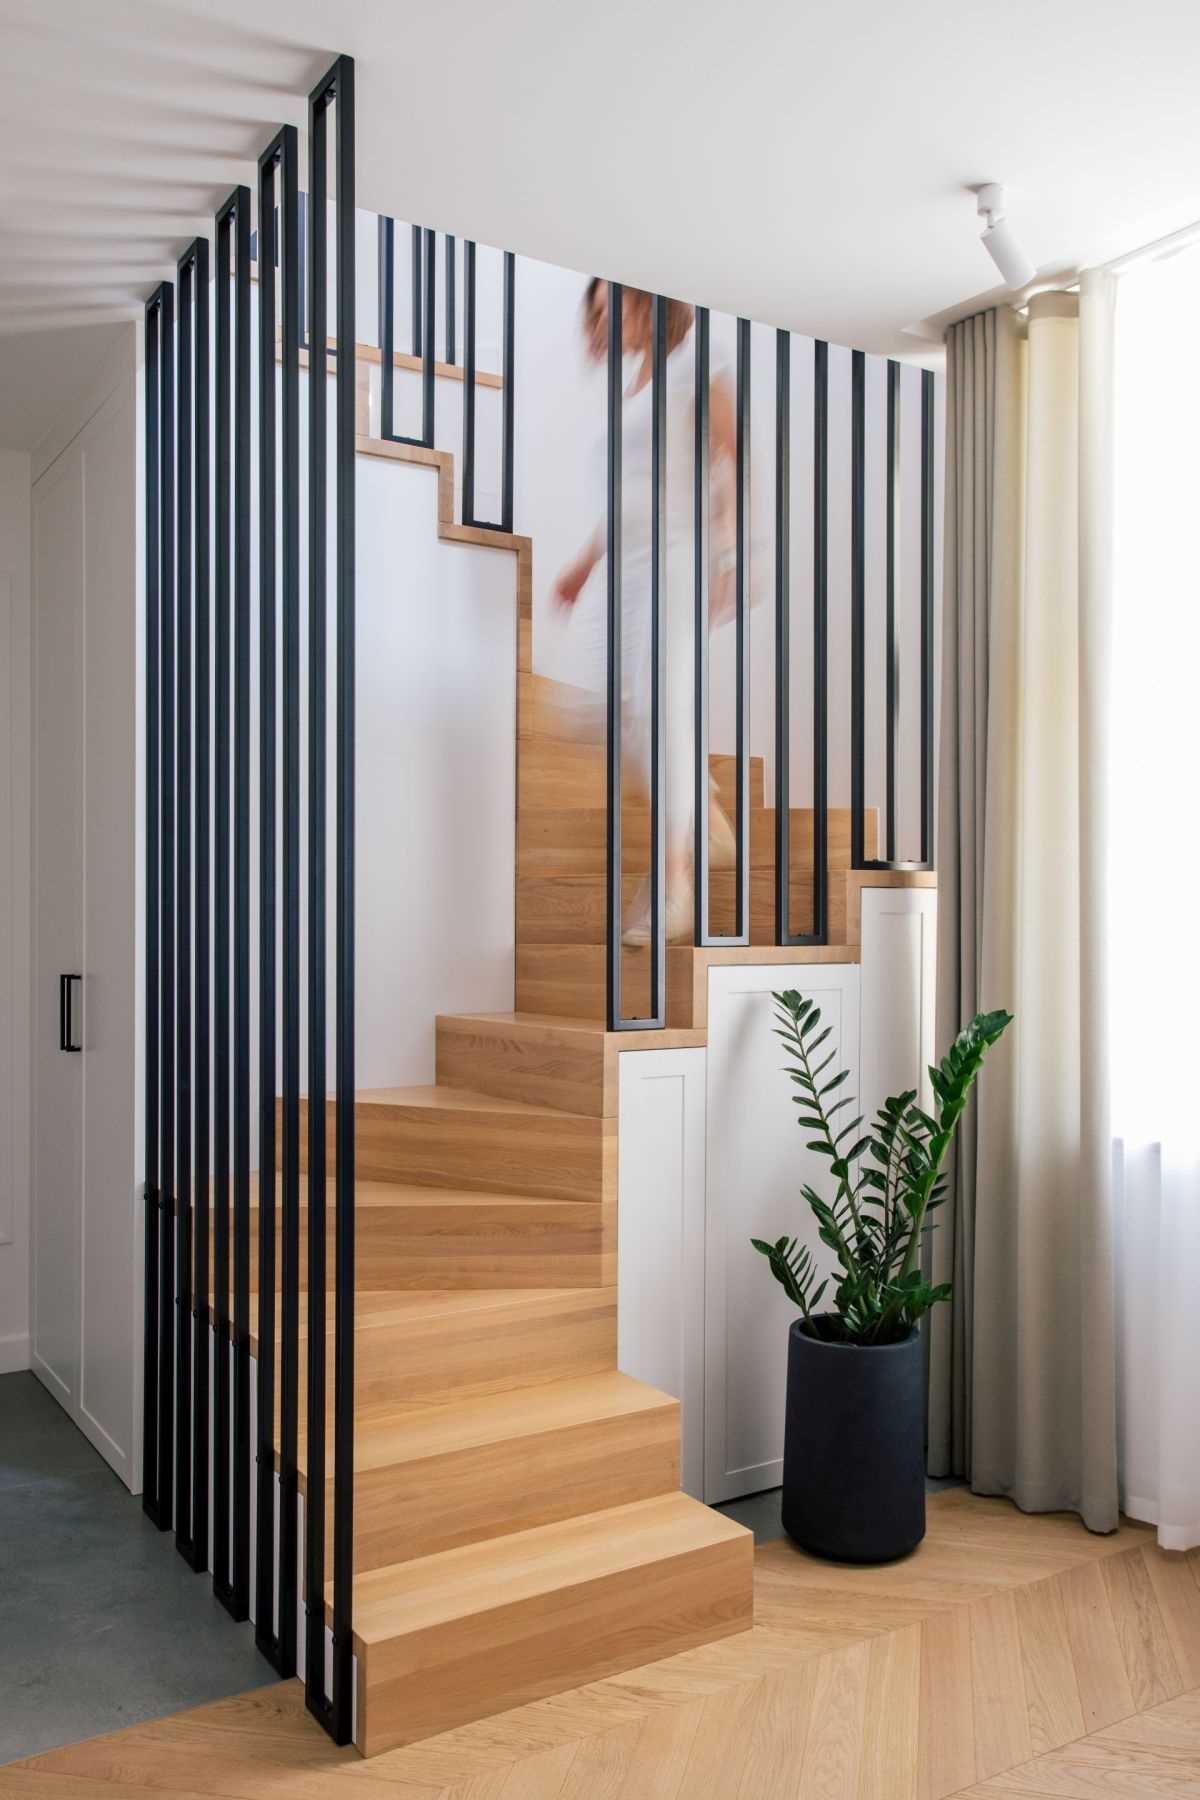 Wood stairs with contrasting black metal accents lead to the upper floor of this modern apartment.